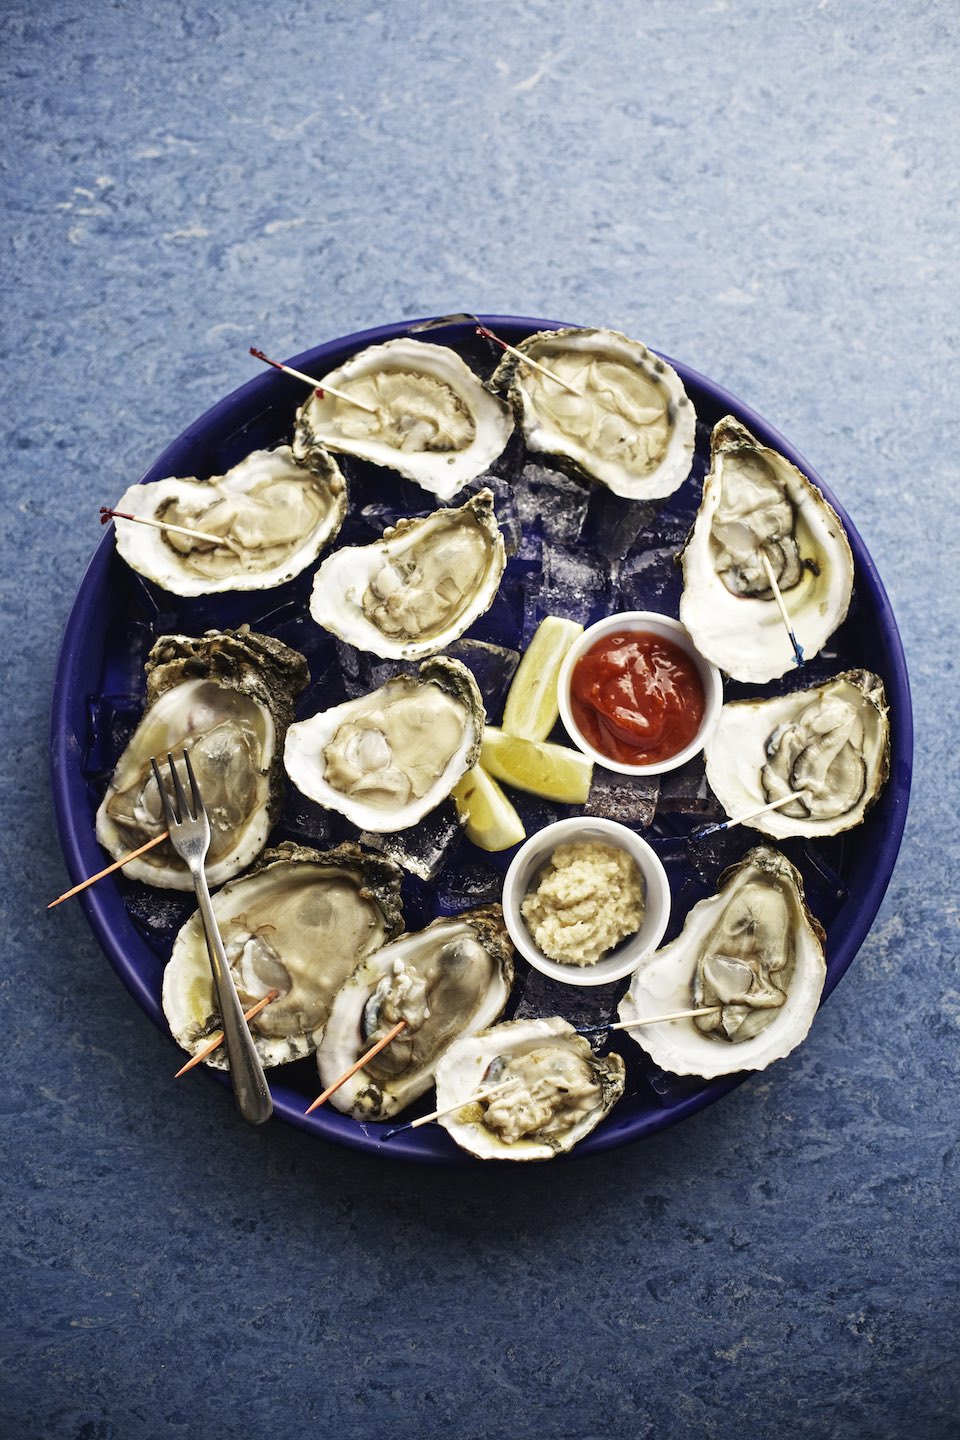 Dozen fresh oysters, horseradish and cocktail sauce on ice in a blue dish.